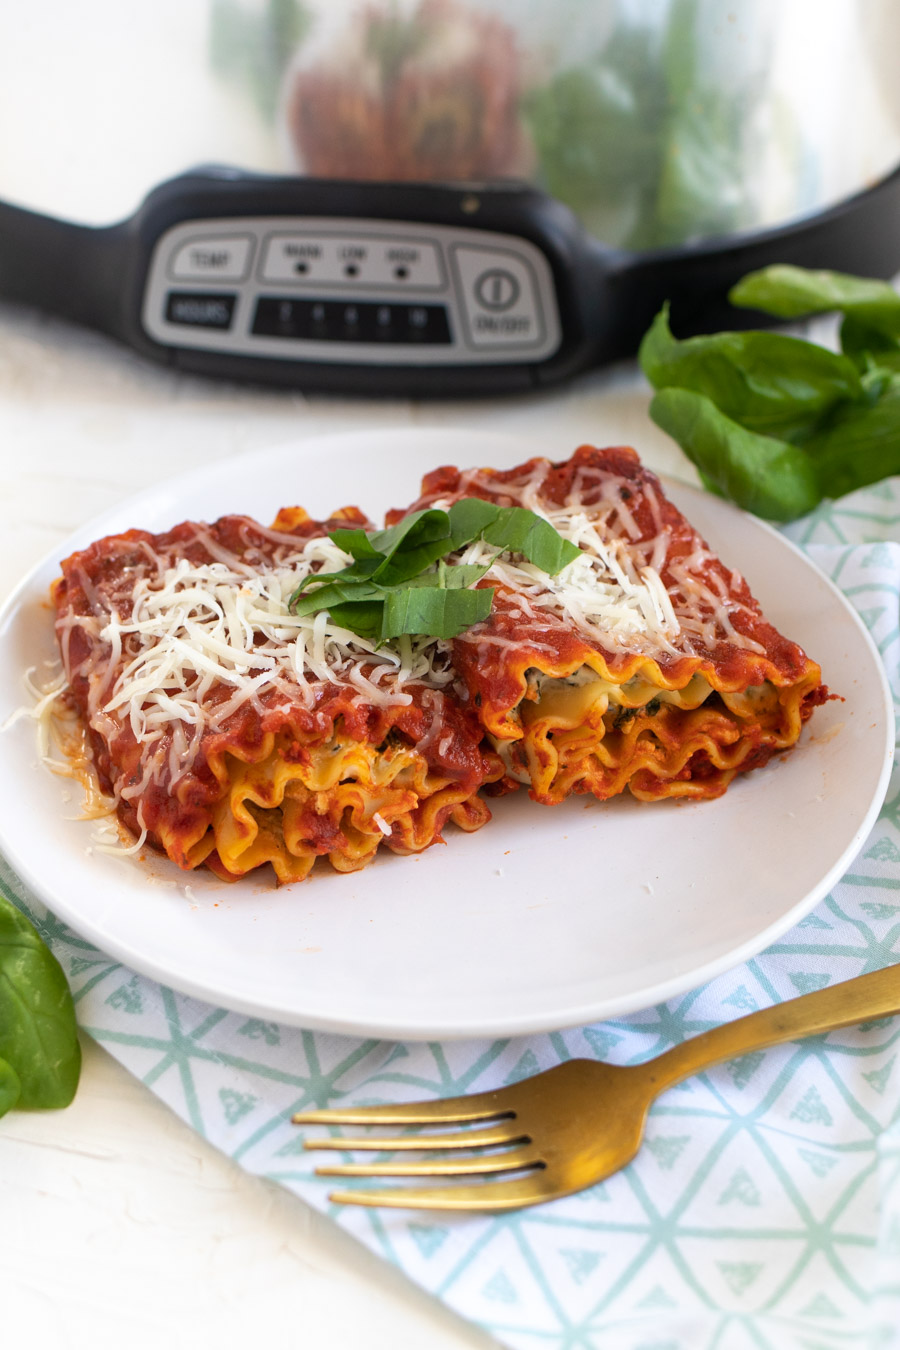 Need an easy weeknight dinner solution? Slow Cooker Lasagna Roll-Ups with spinach, ricotta, mozzarella, and homemade marinara are the answer! This perfect meal that's proportioned for lunch leftovers.